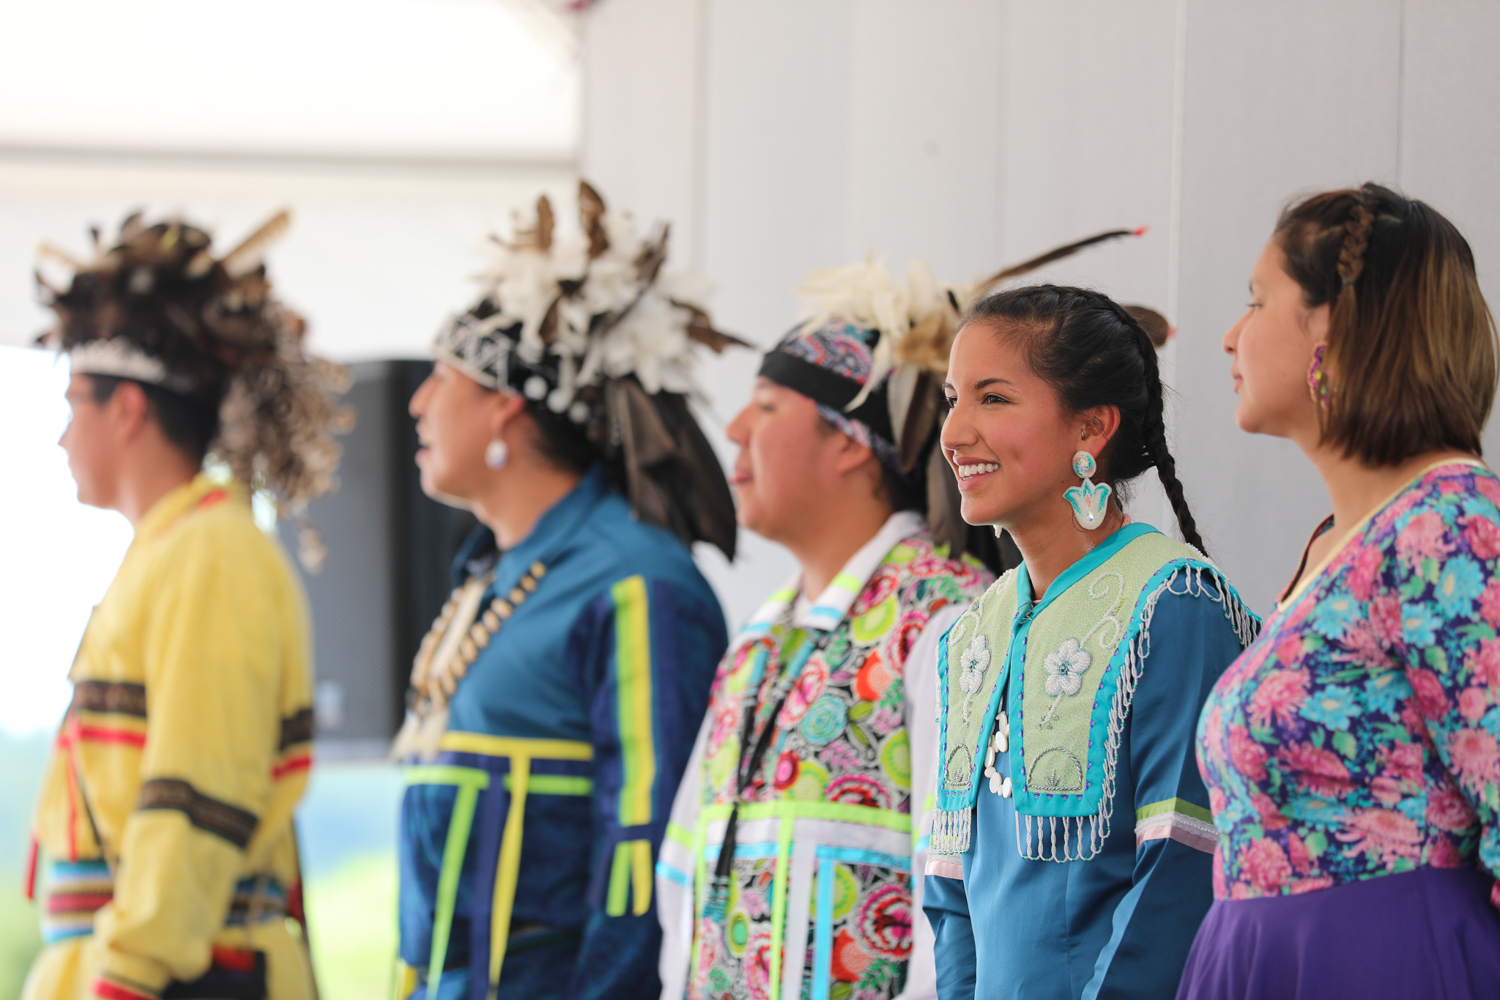 A group of indigenious folks stand diagonally in a row, looking away from the camera. Some appear to be talking or singing, but each face gets slightly blurrier as they move away from the camera. The participants are formally dressed, some wearing headdresses or elaborate beadwork.